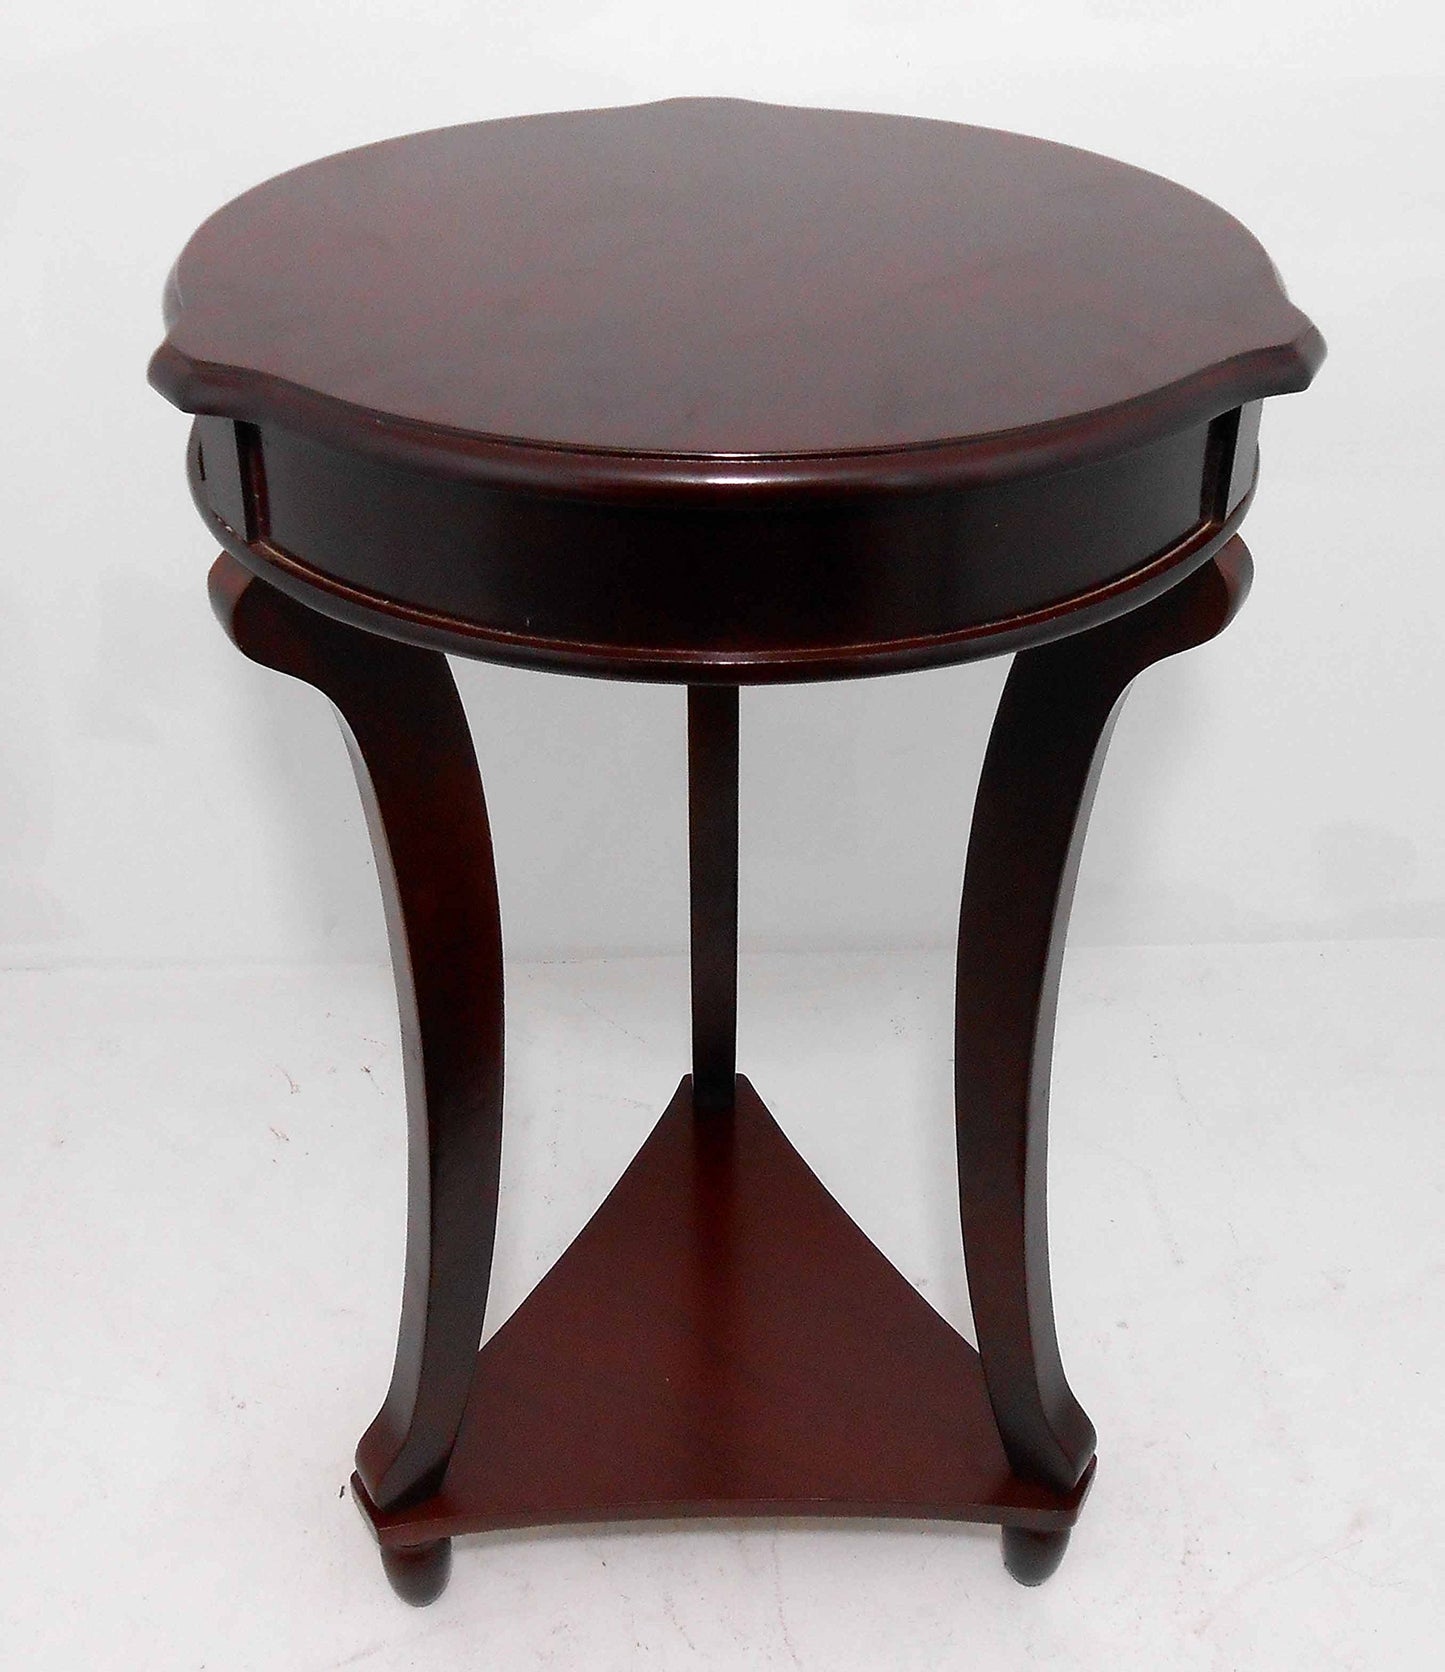 NF Brown Round Accent Tables/End, Telephone, Plant Table/Home Decorative # 1763